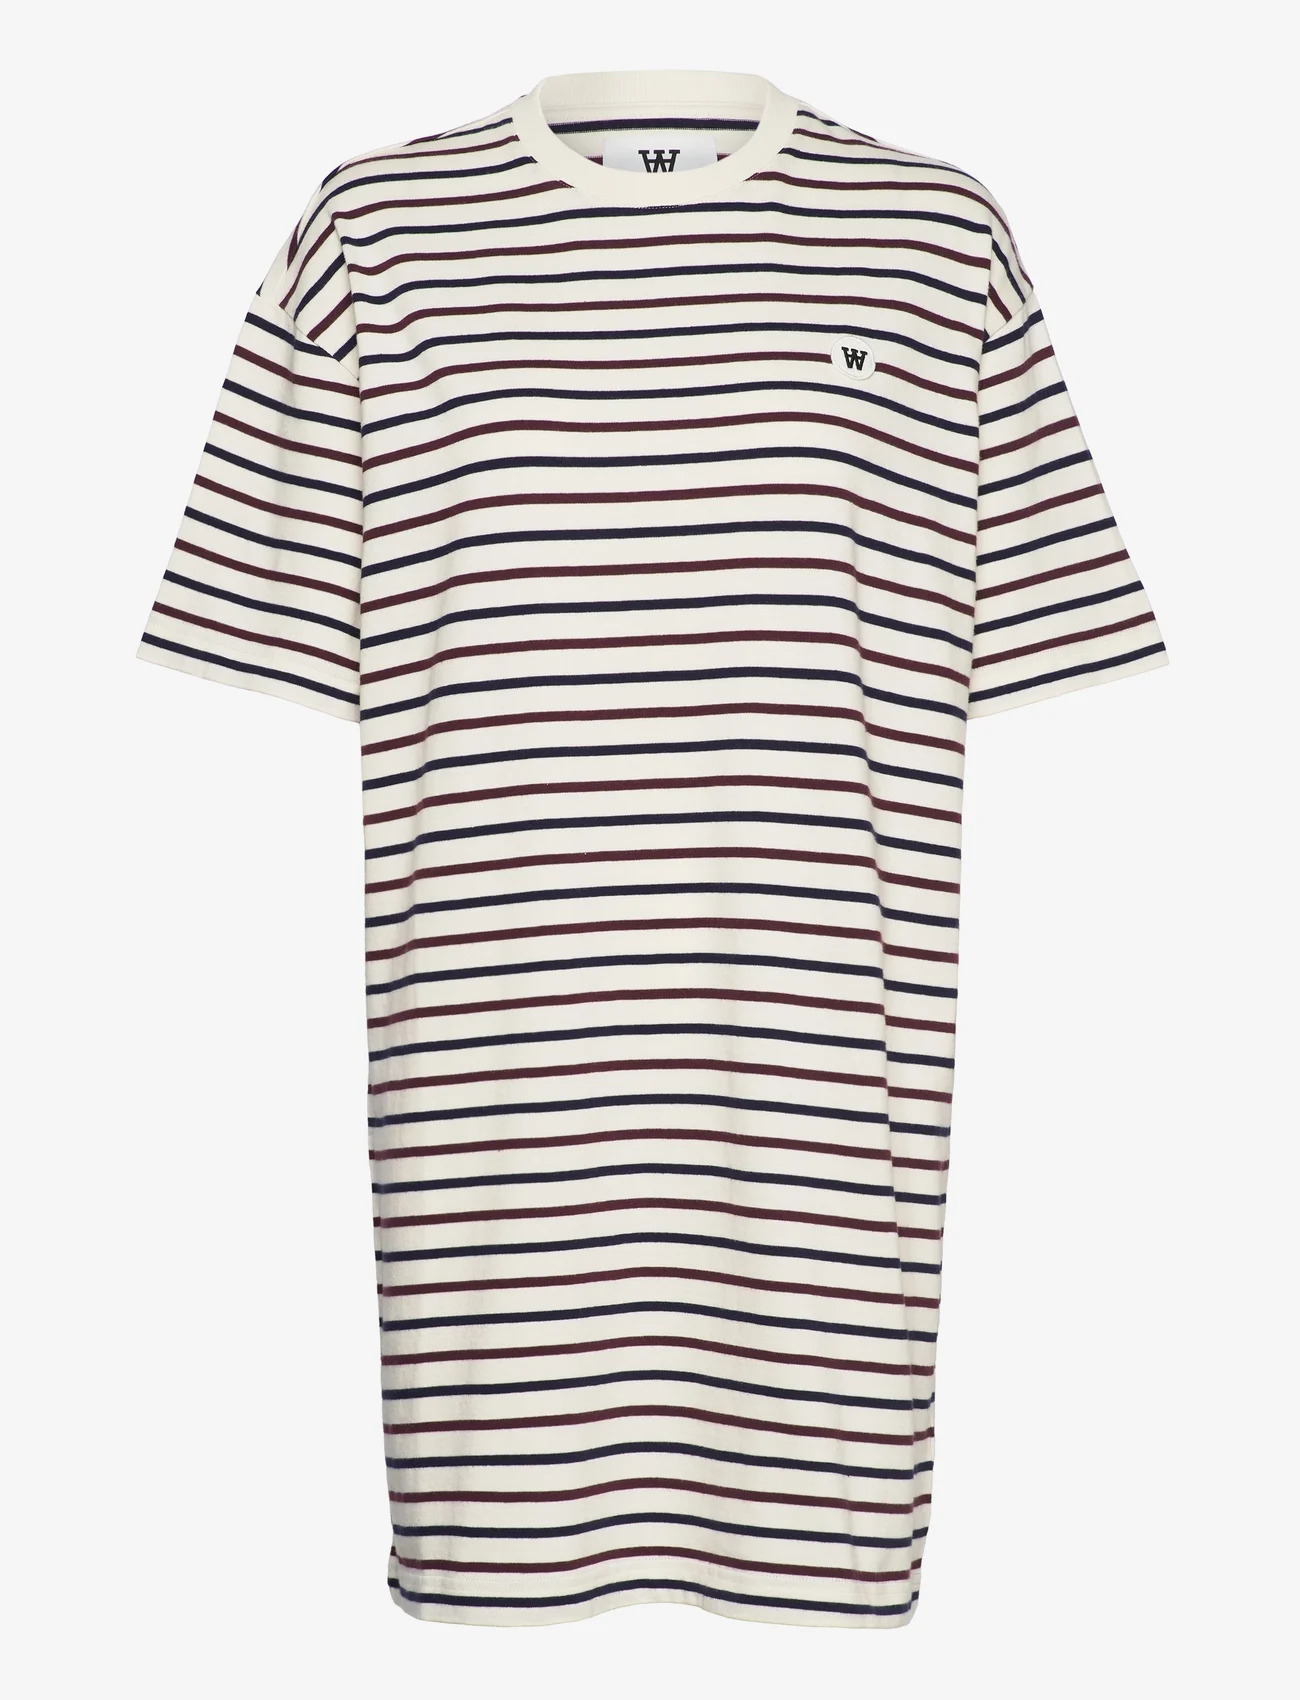 Double A by Wood Wood - Ulla stripe dress - t-shirt-kleider - off-white/burgundy stripes - 0